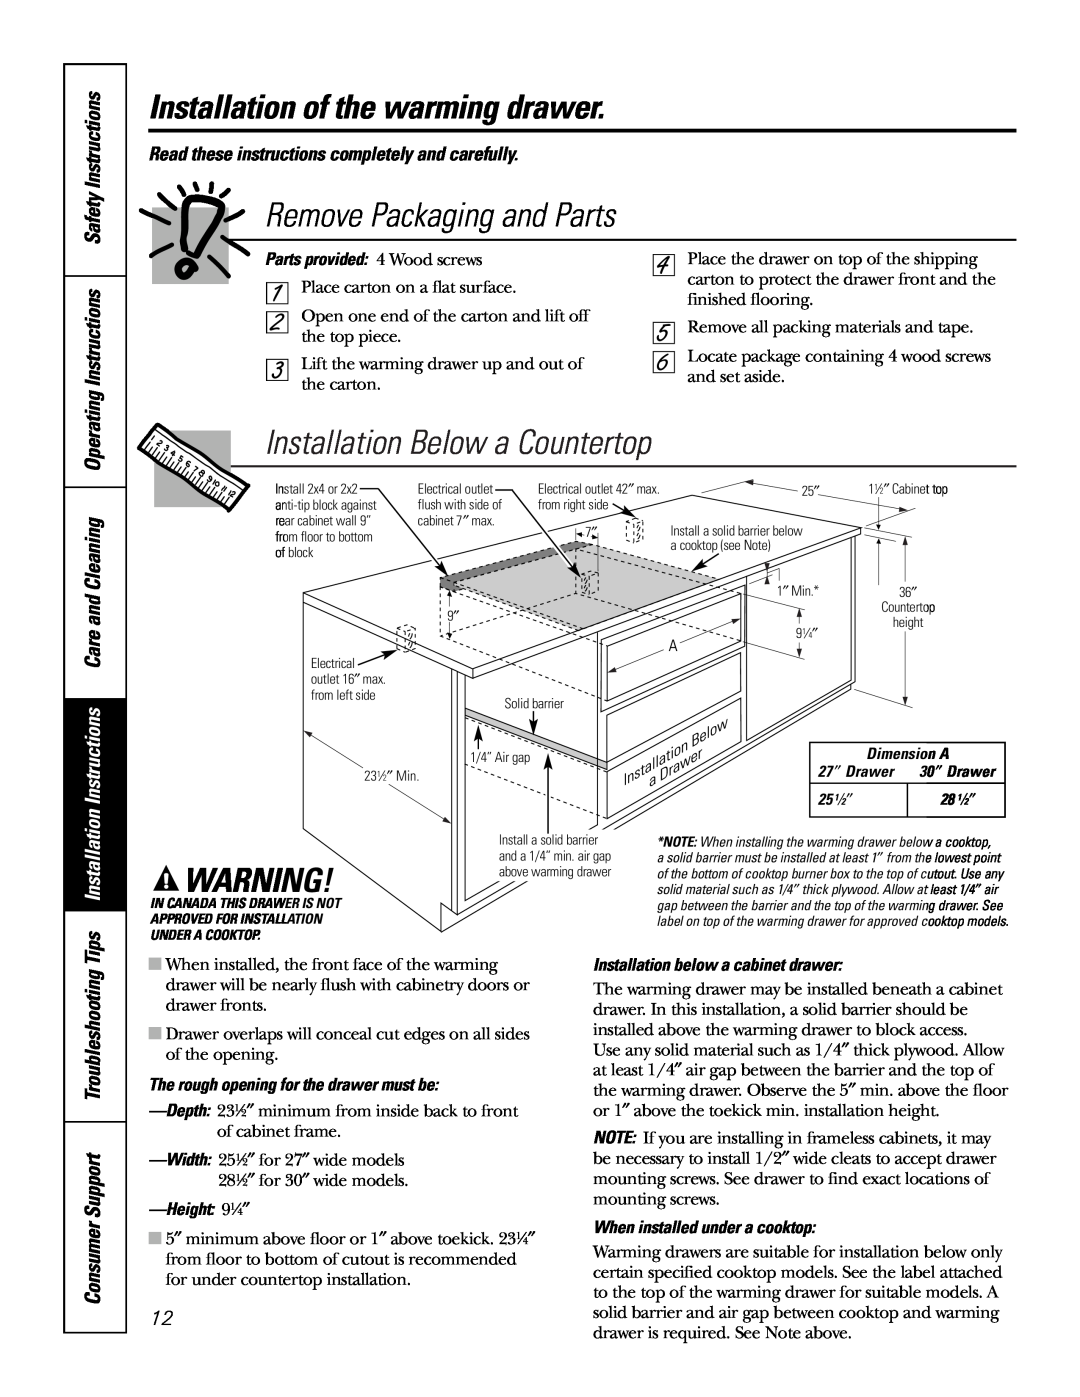 GE JKD915 Remove Packaging and Parts, Installation Below a Countertop, Instructions, Installation of the warming drawer 